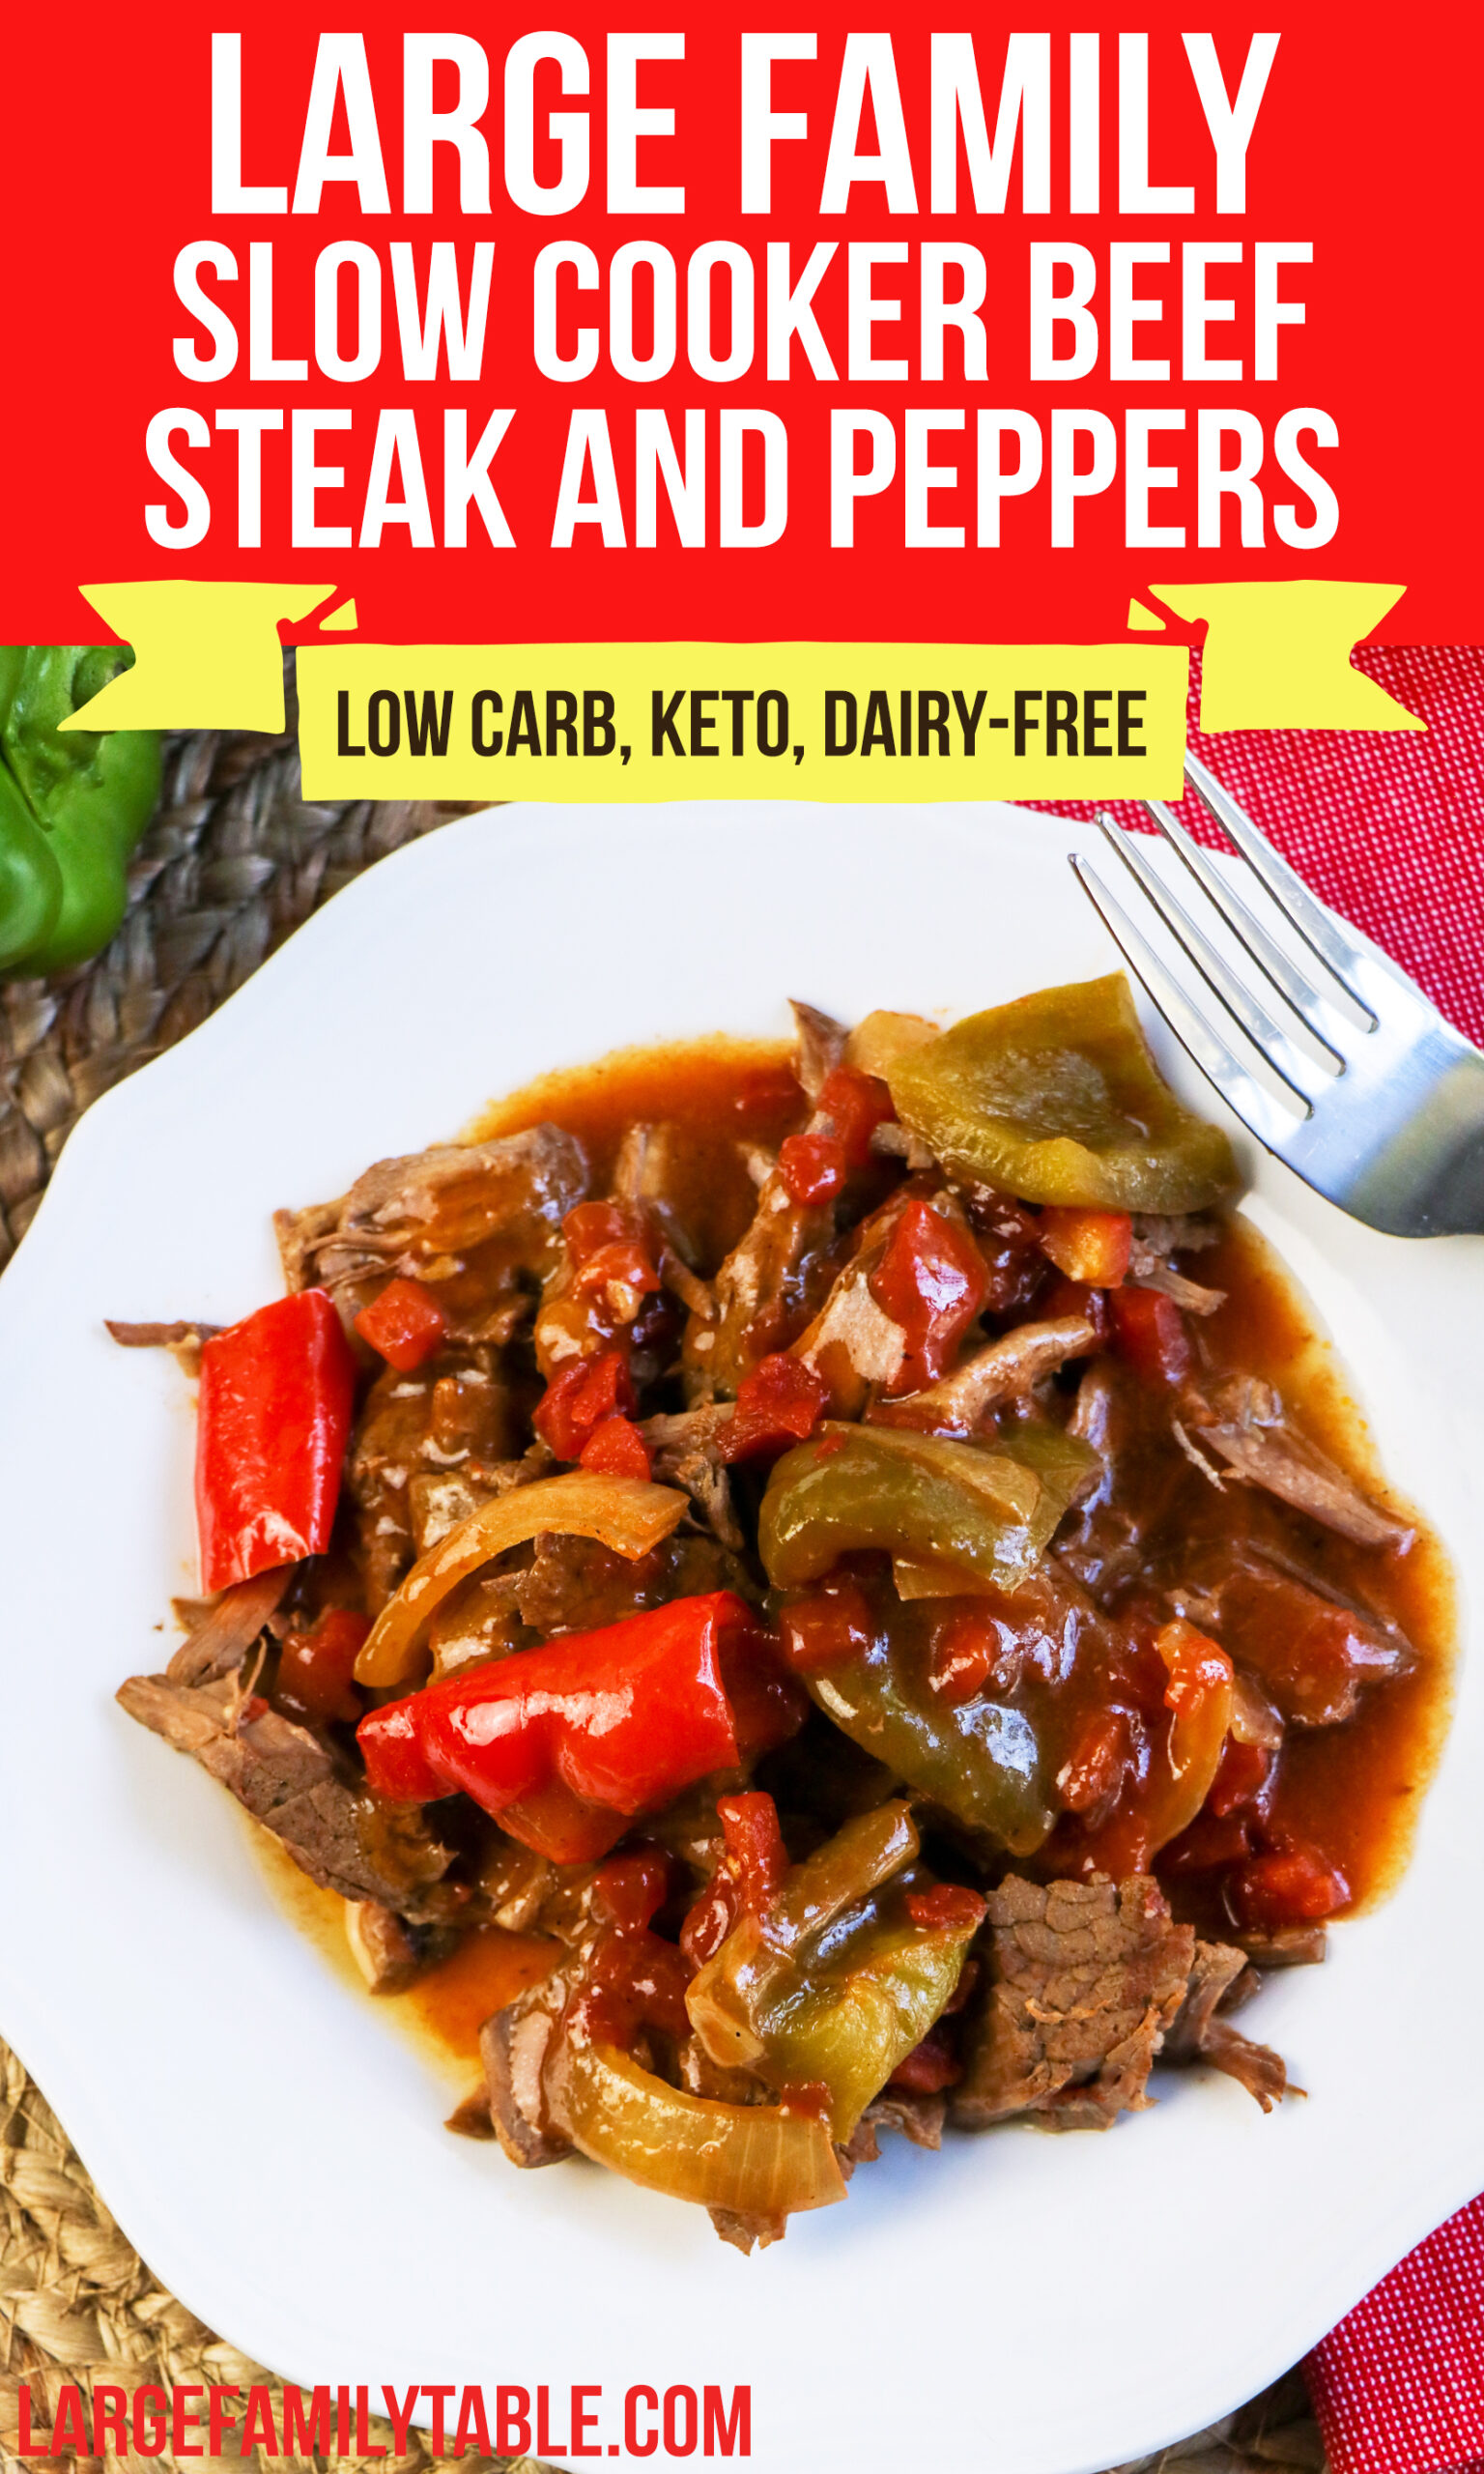 Large Family Beef Steak and Peppers